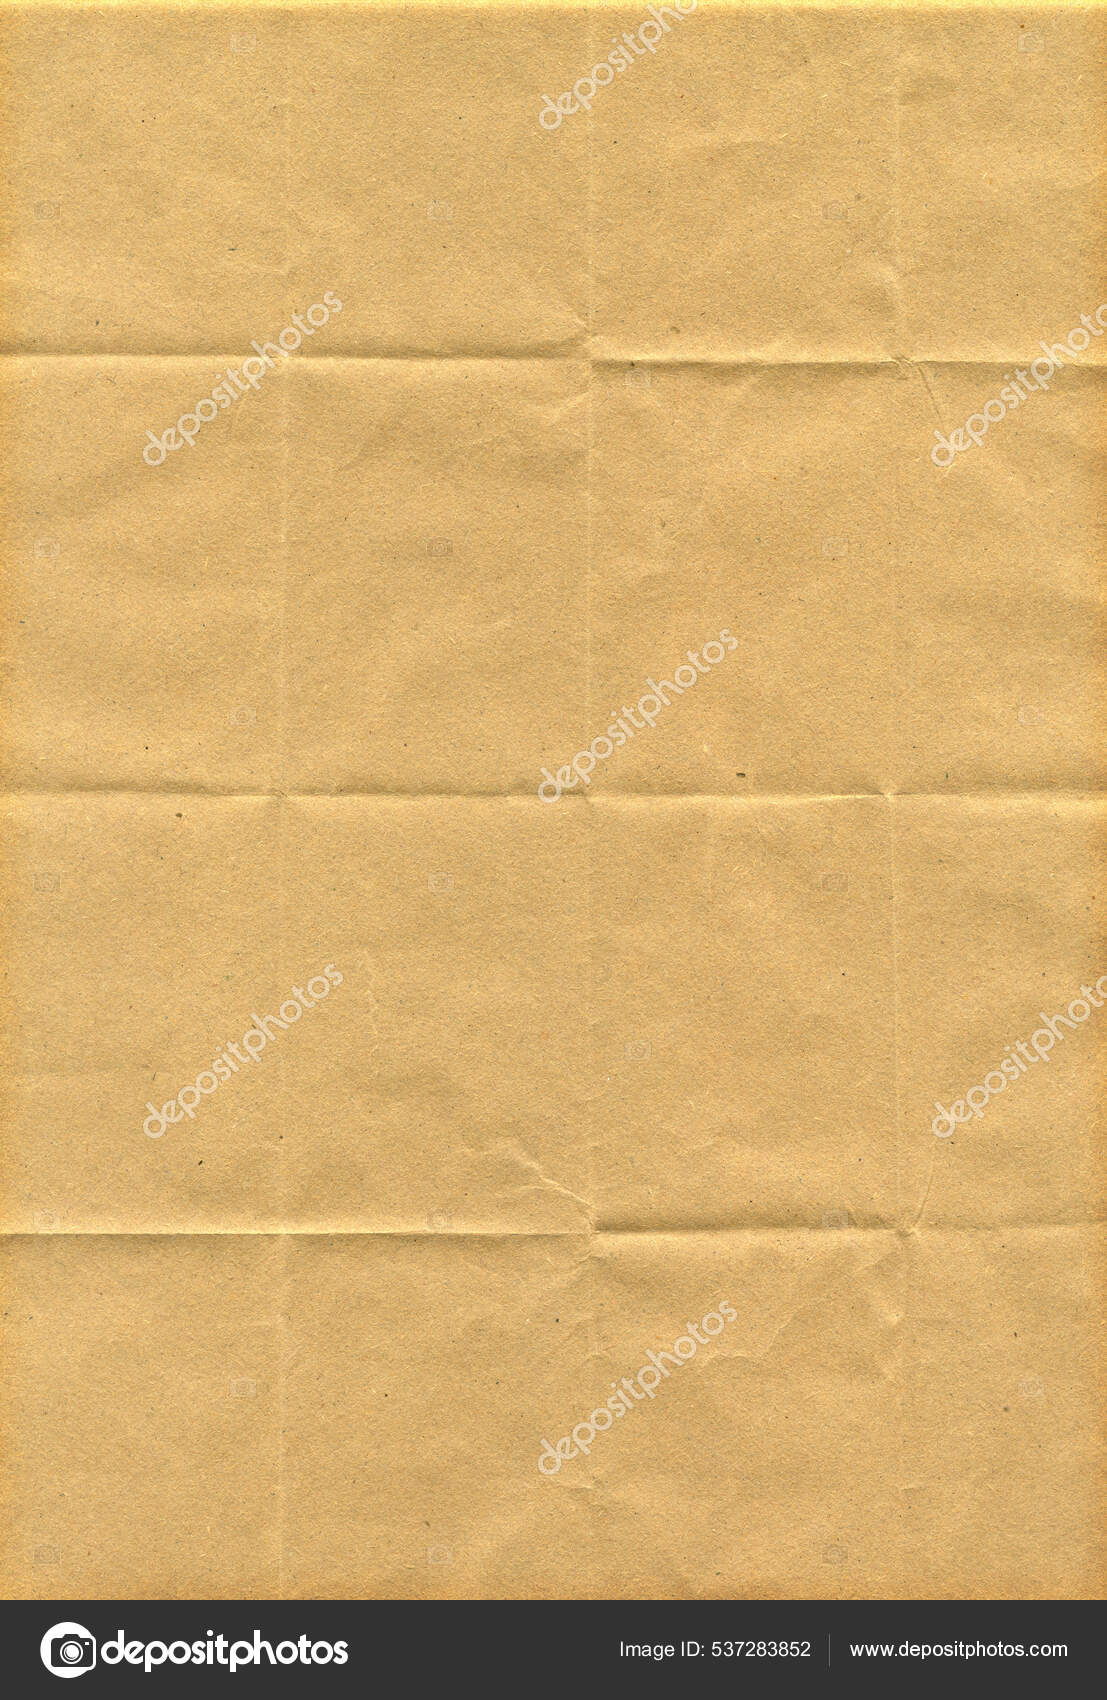 Isolated Aged Paper Texture Background, Old Letter, Vintage Paper,  Parchment Background Image And Wallpaper for Free Download